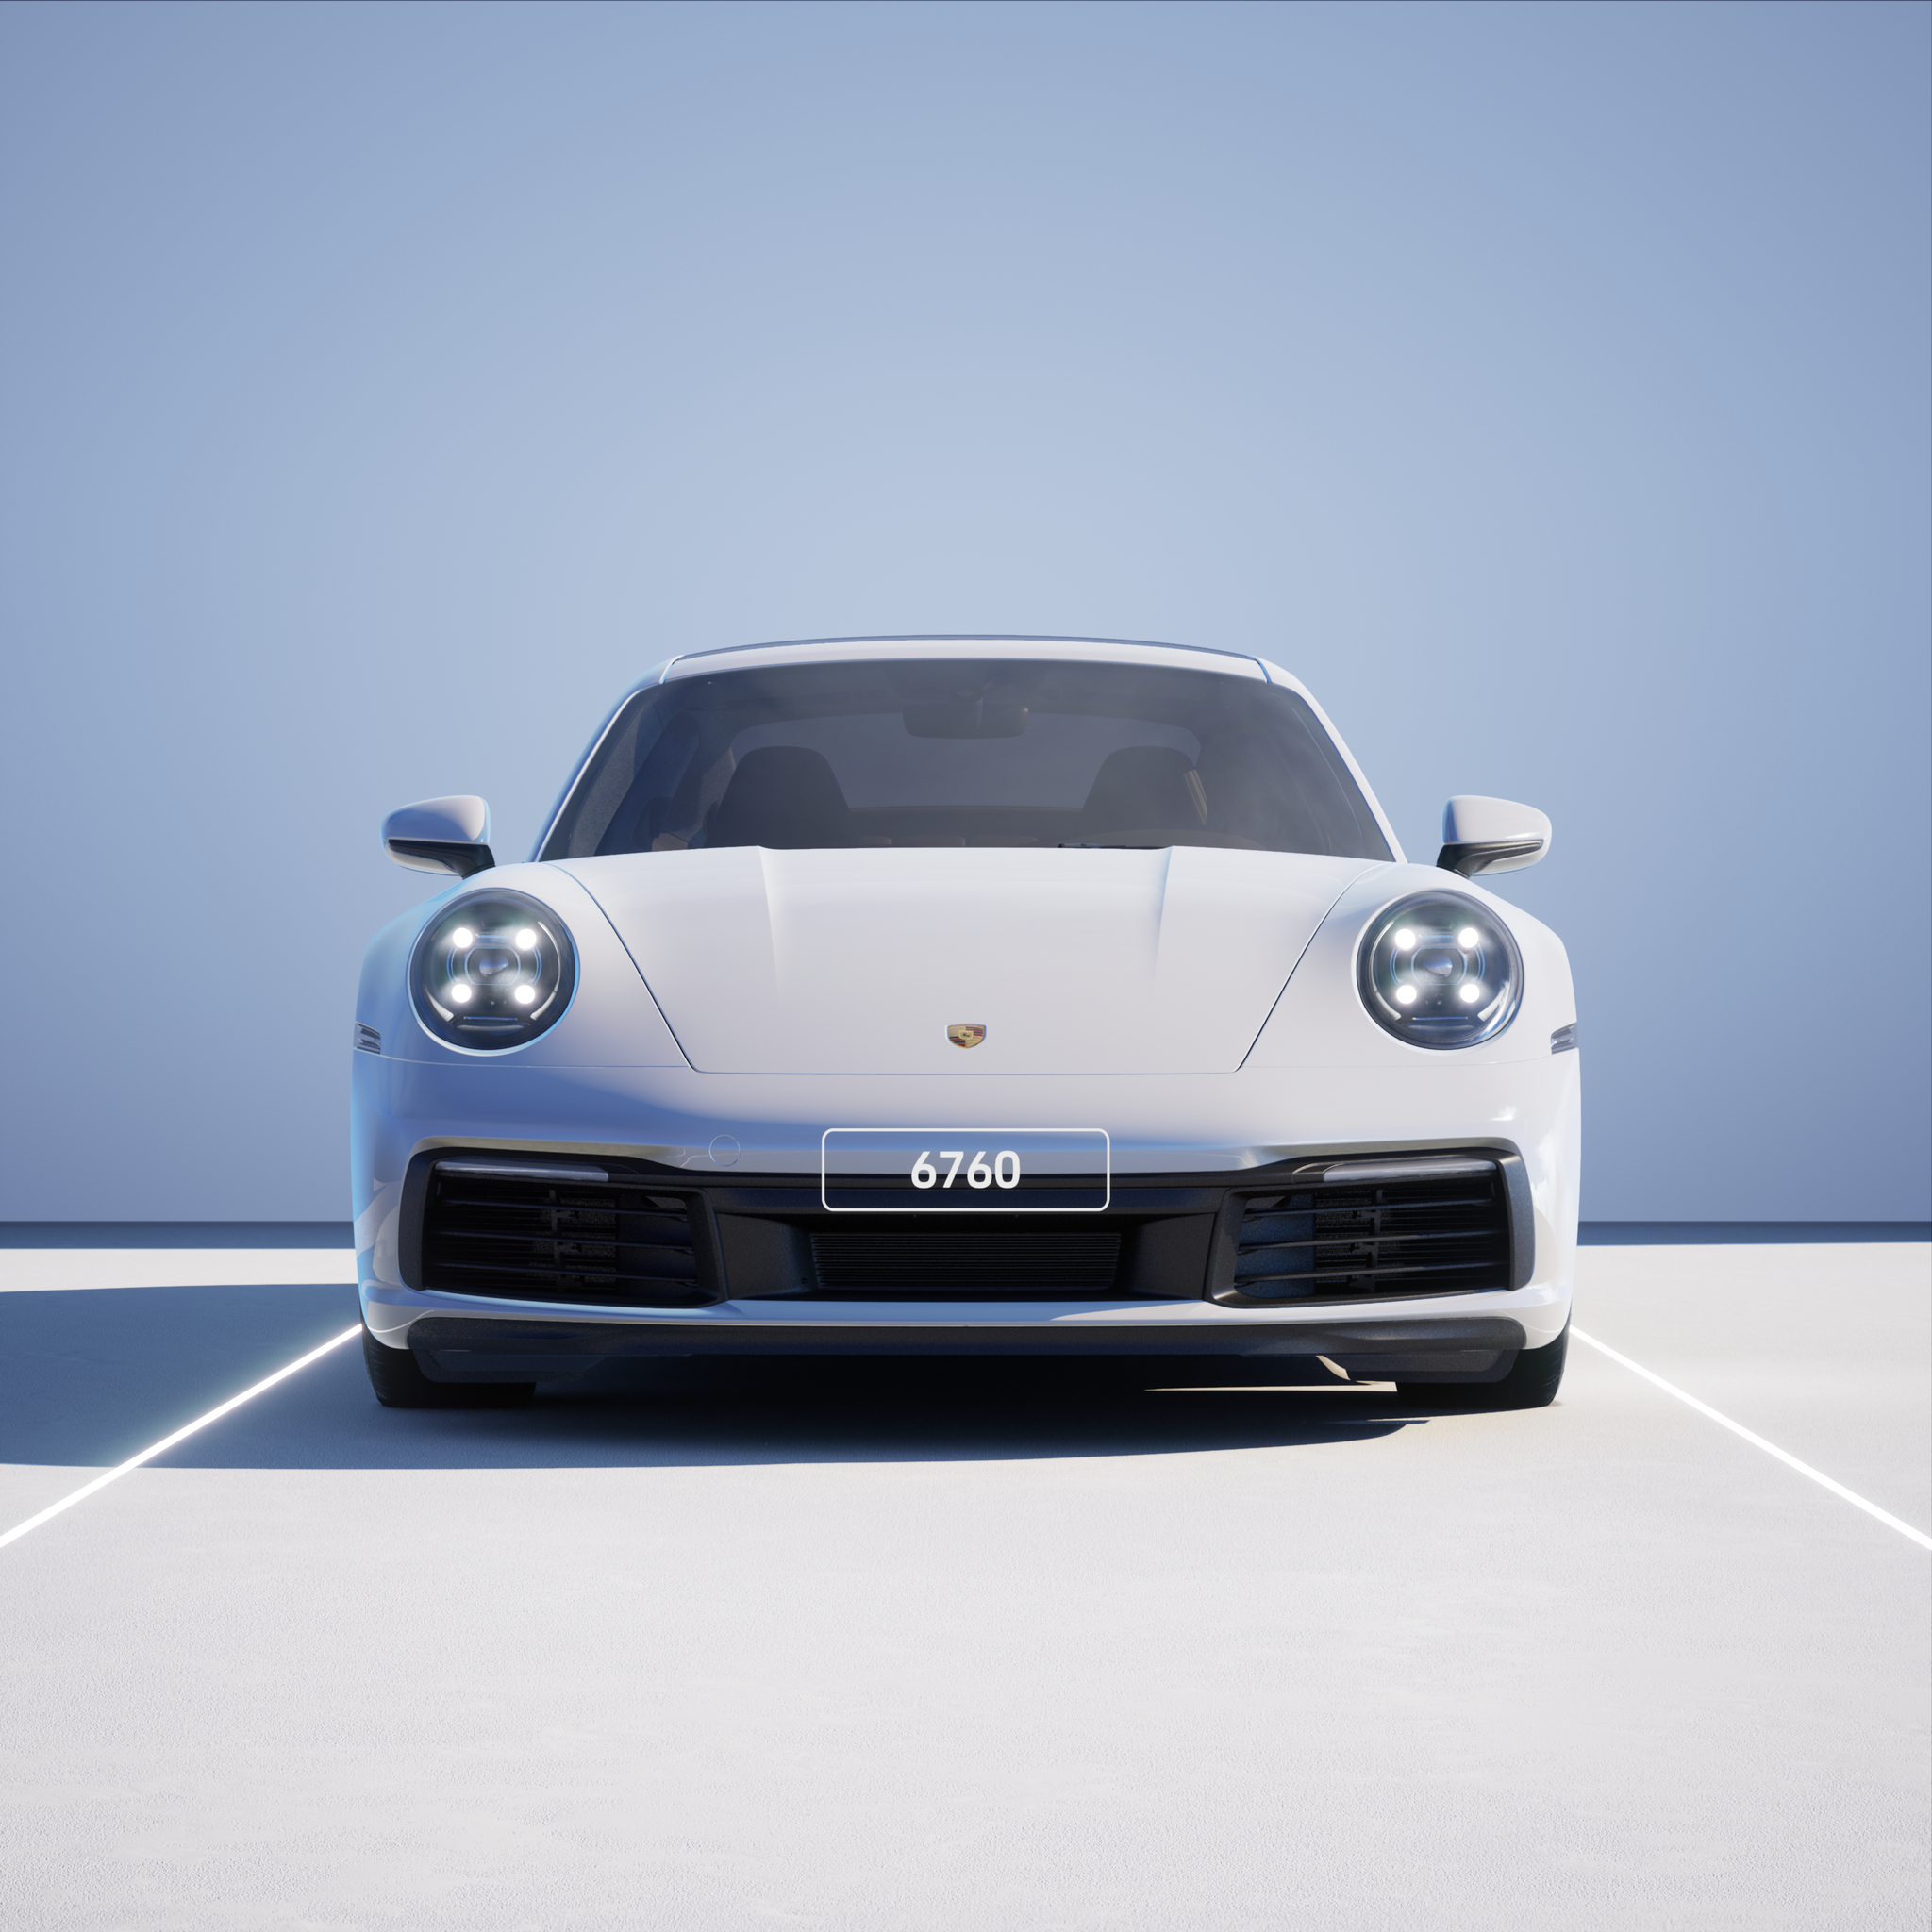 The PORSCHΞ 911 6760 image in phase